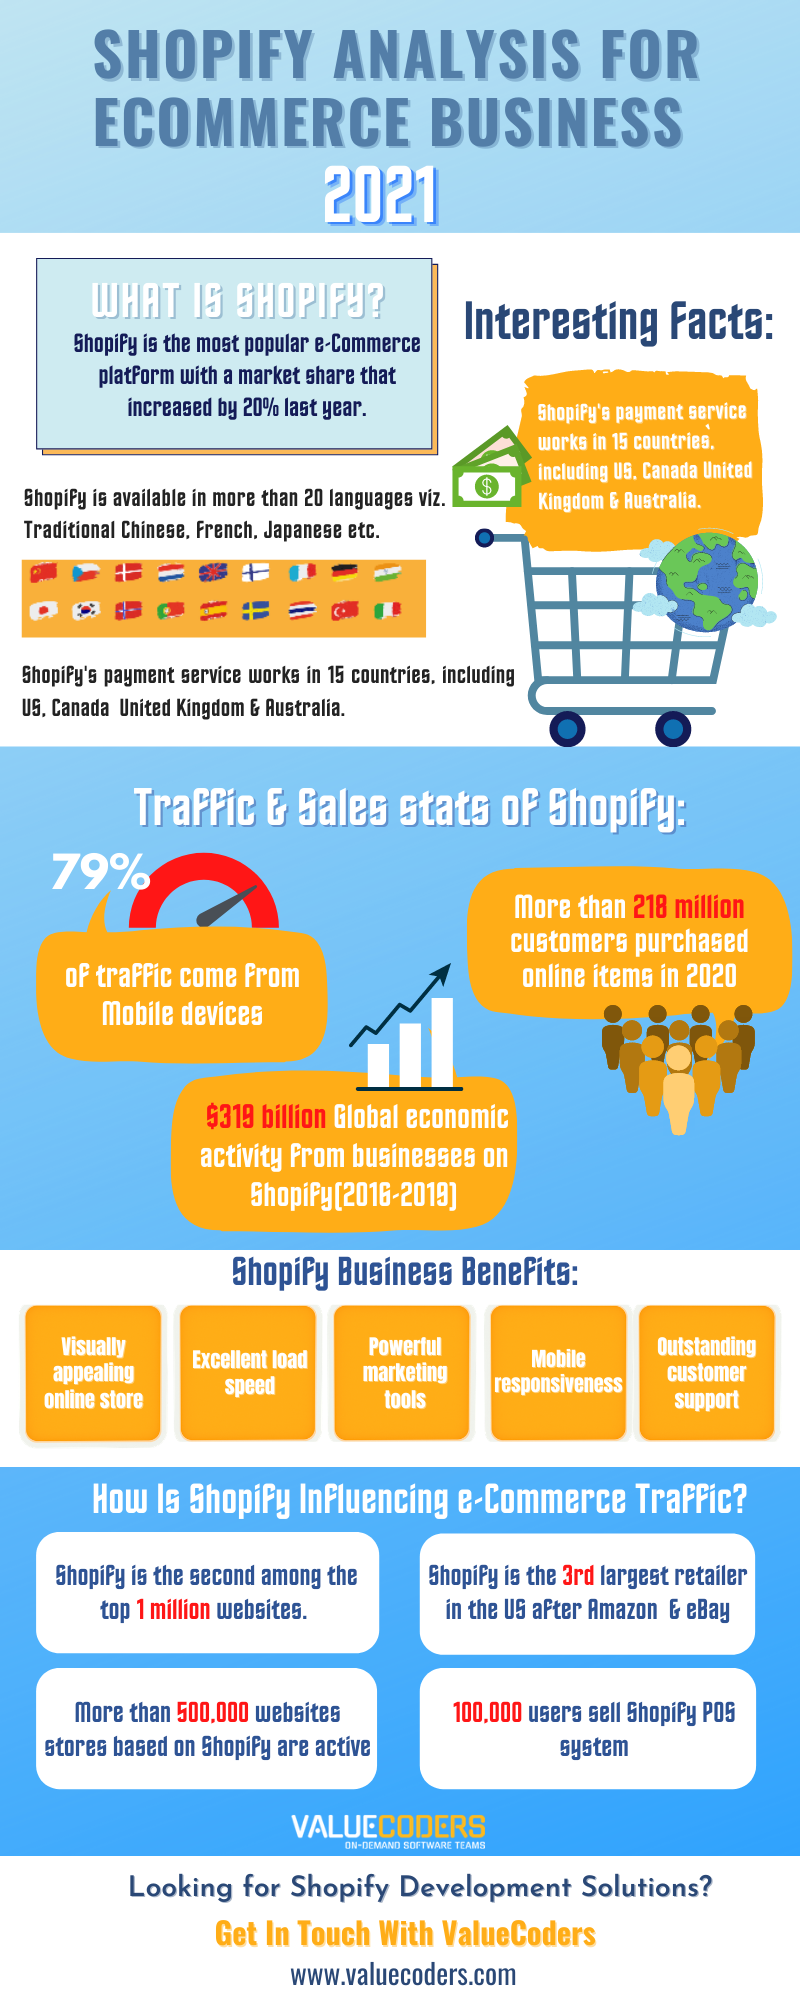 Shopify for eCommerce Business